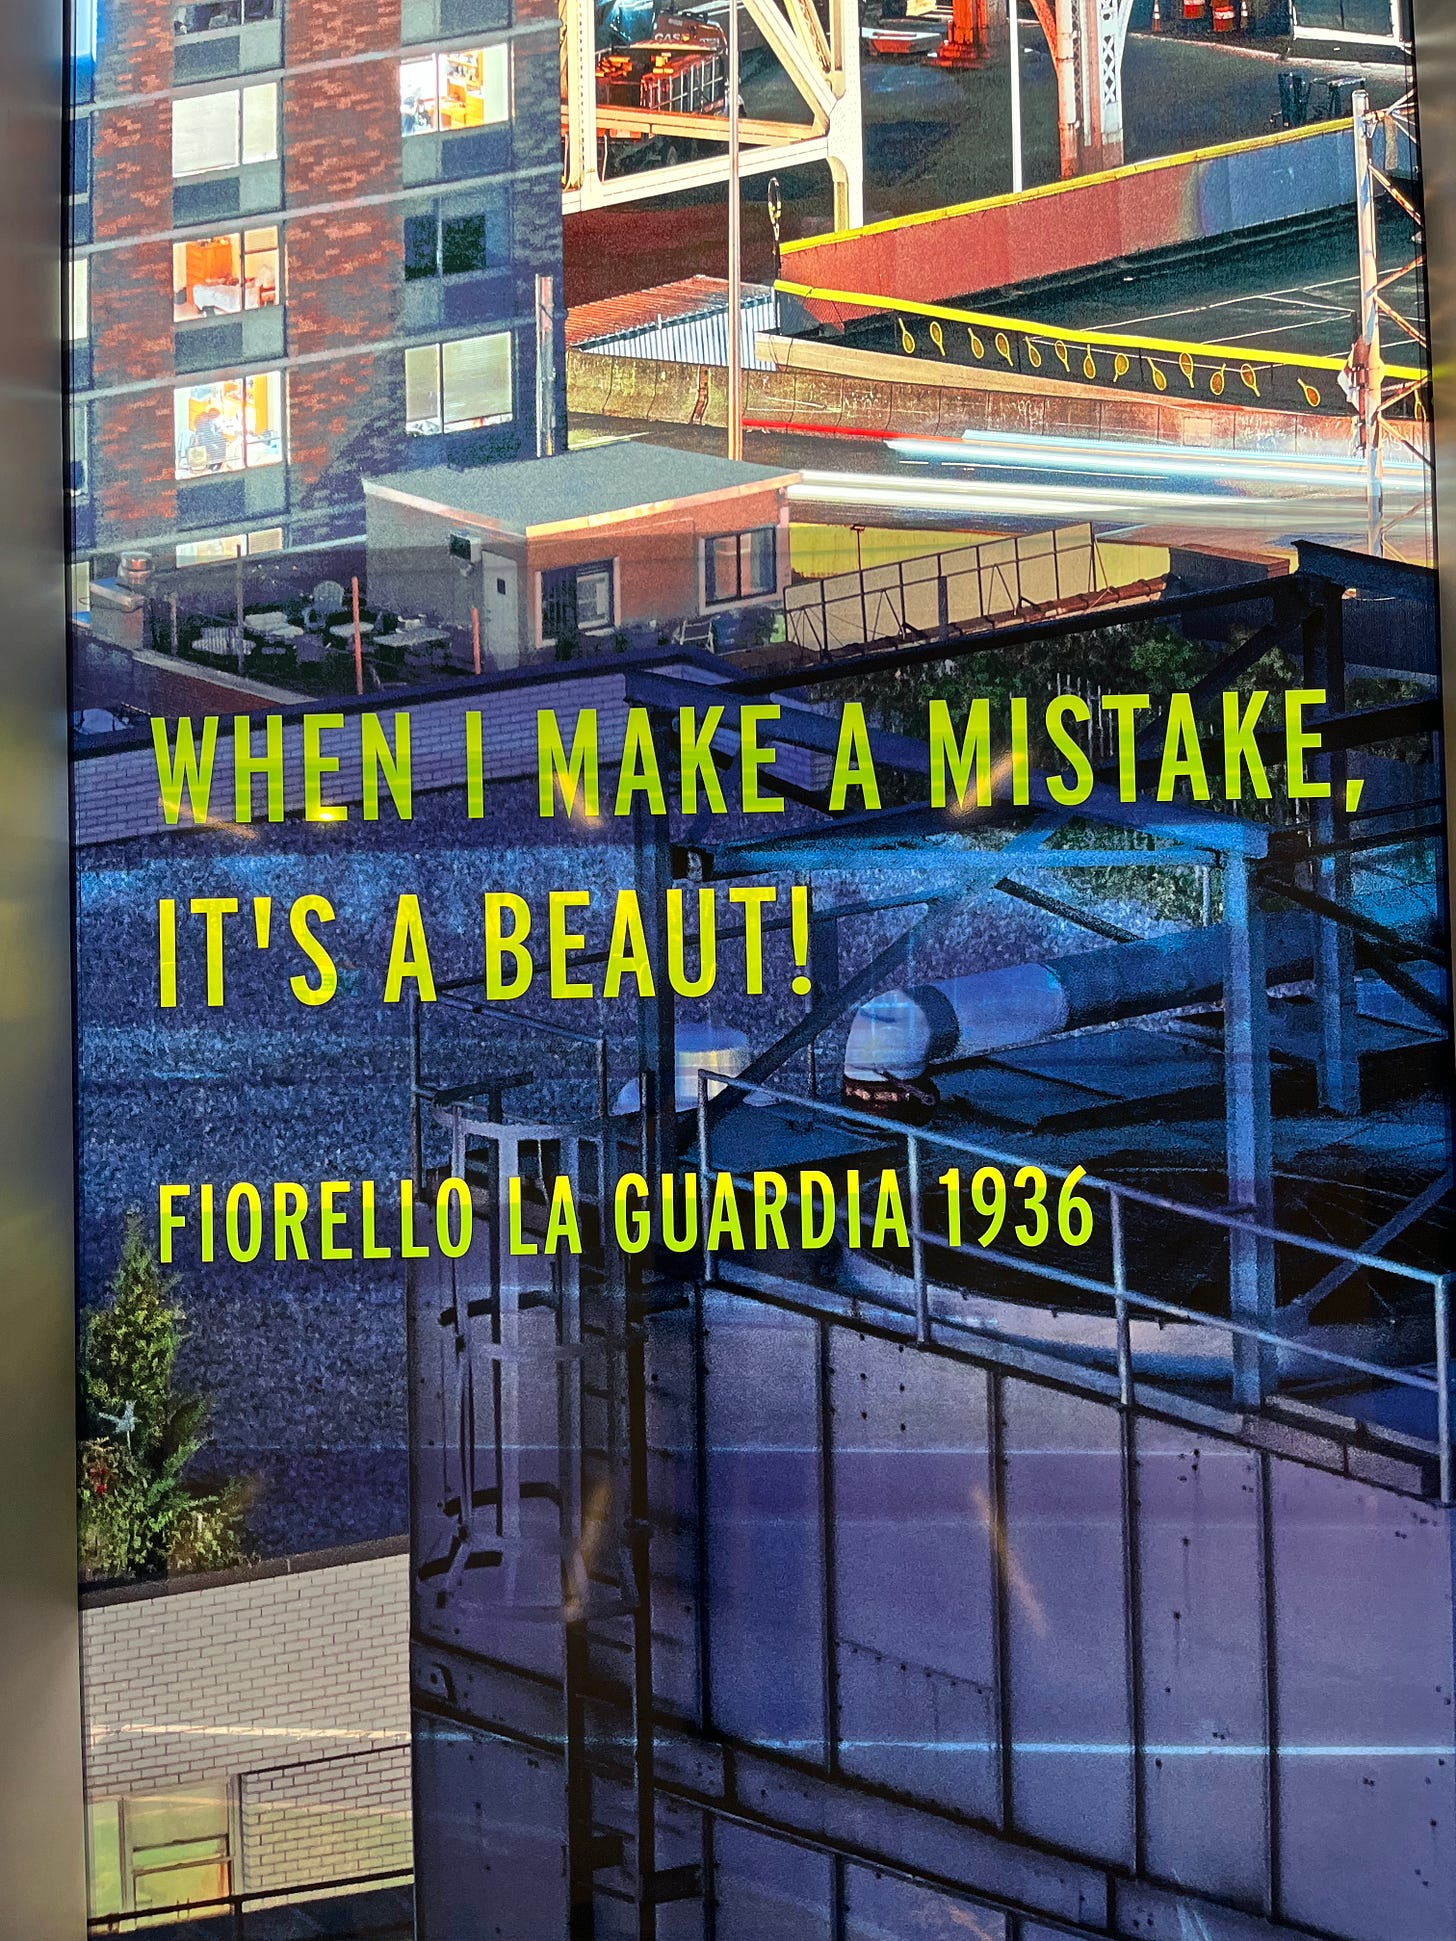 Window art at LaGuardia which features scenes from around the city with the quote "When I Make a Mistake, It's a Beaut!" from Fiorello LaGuardia 1936